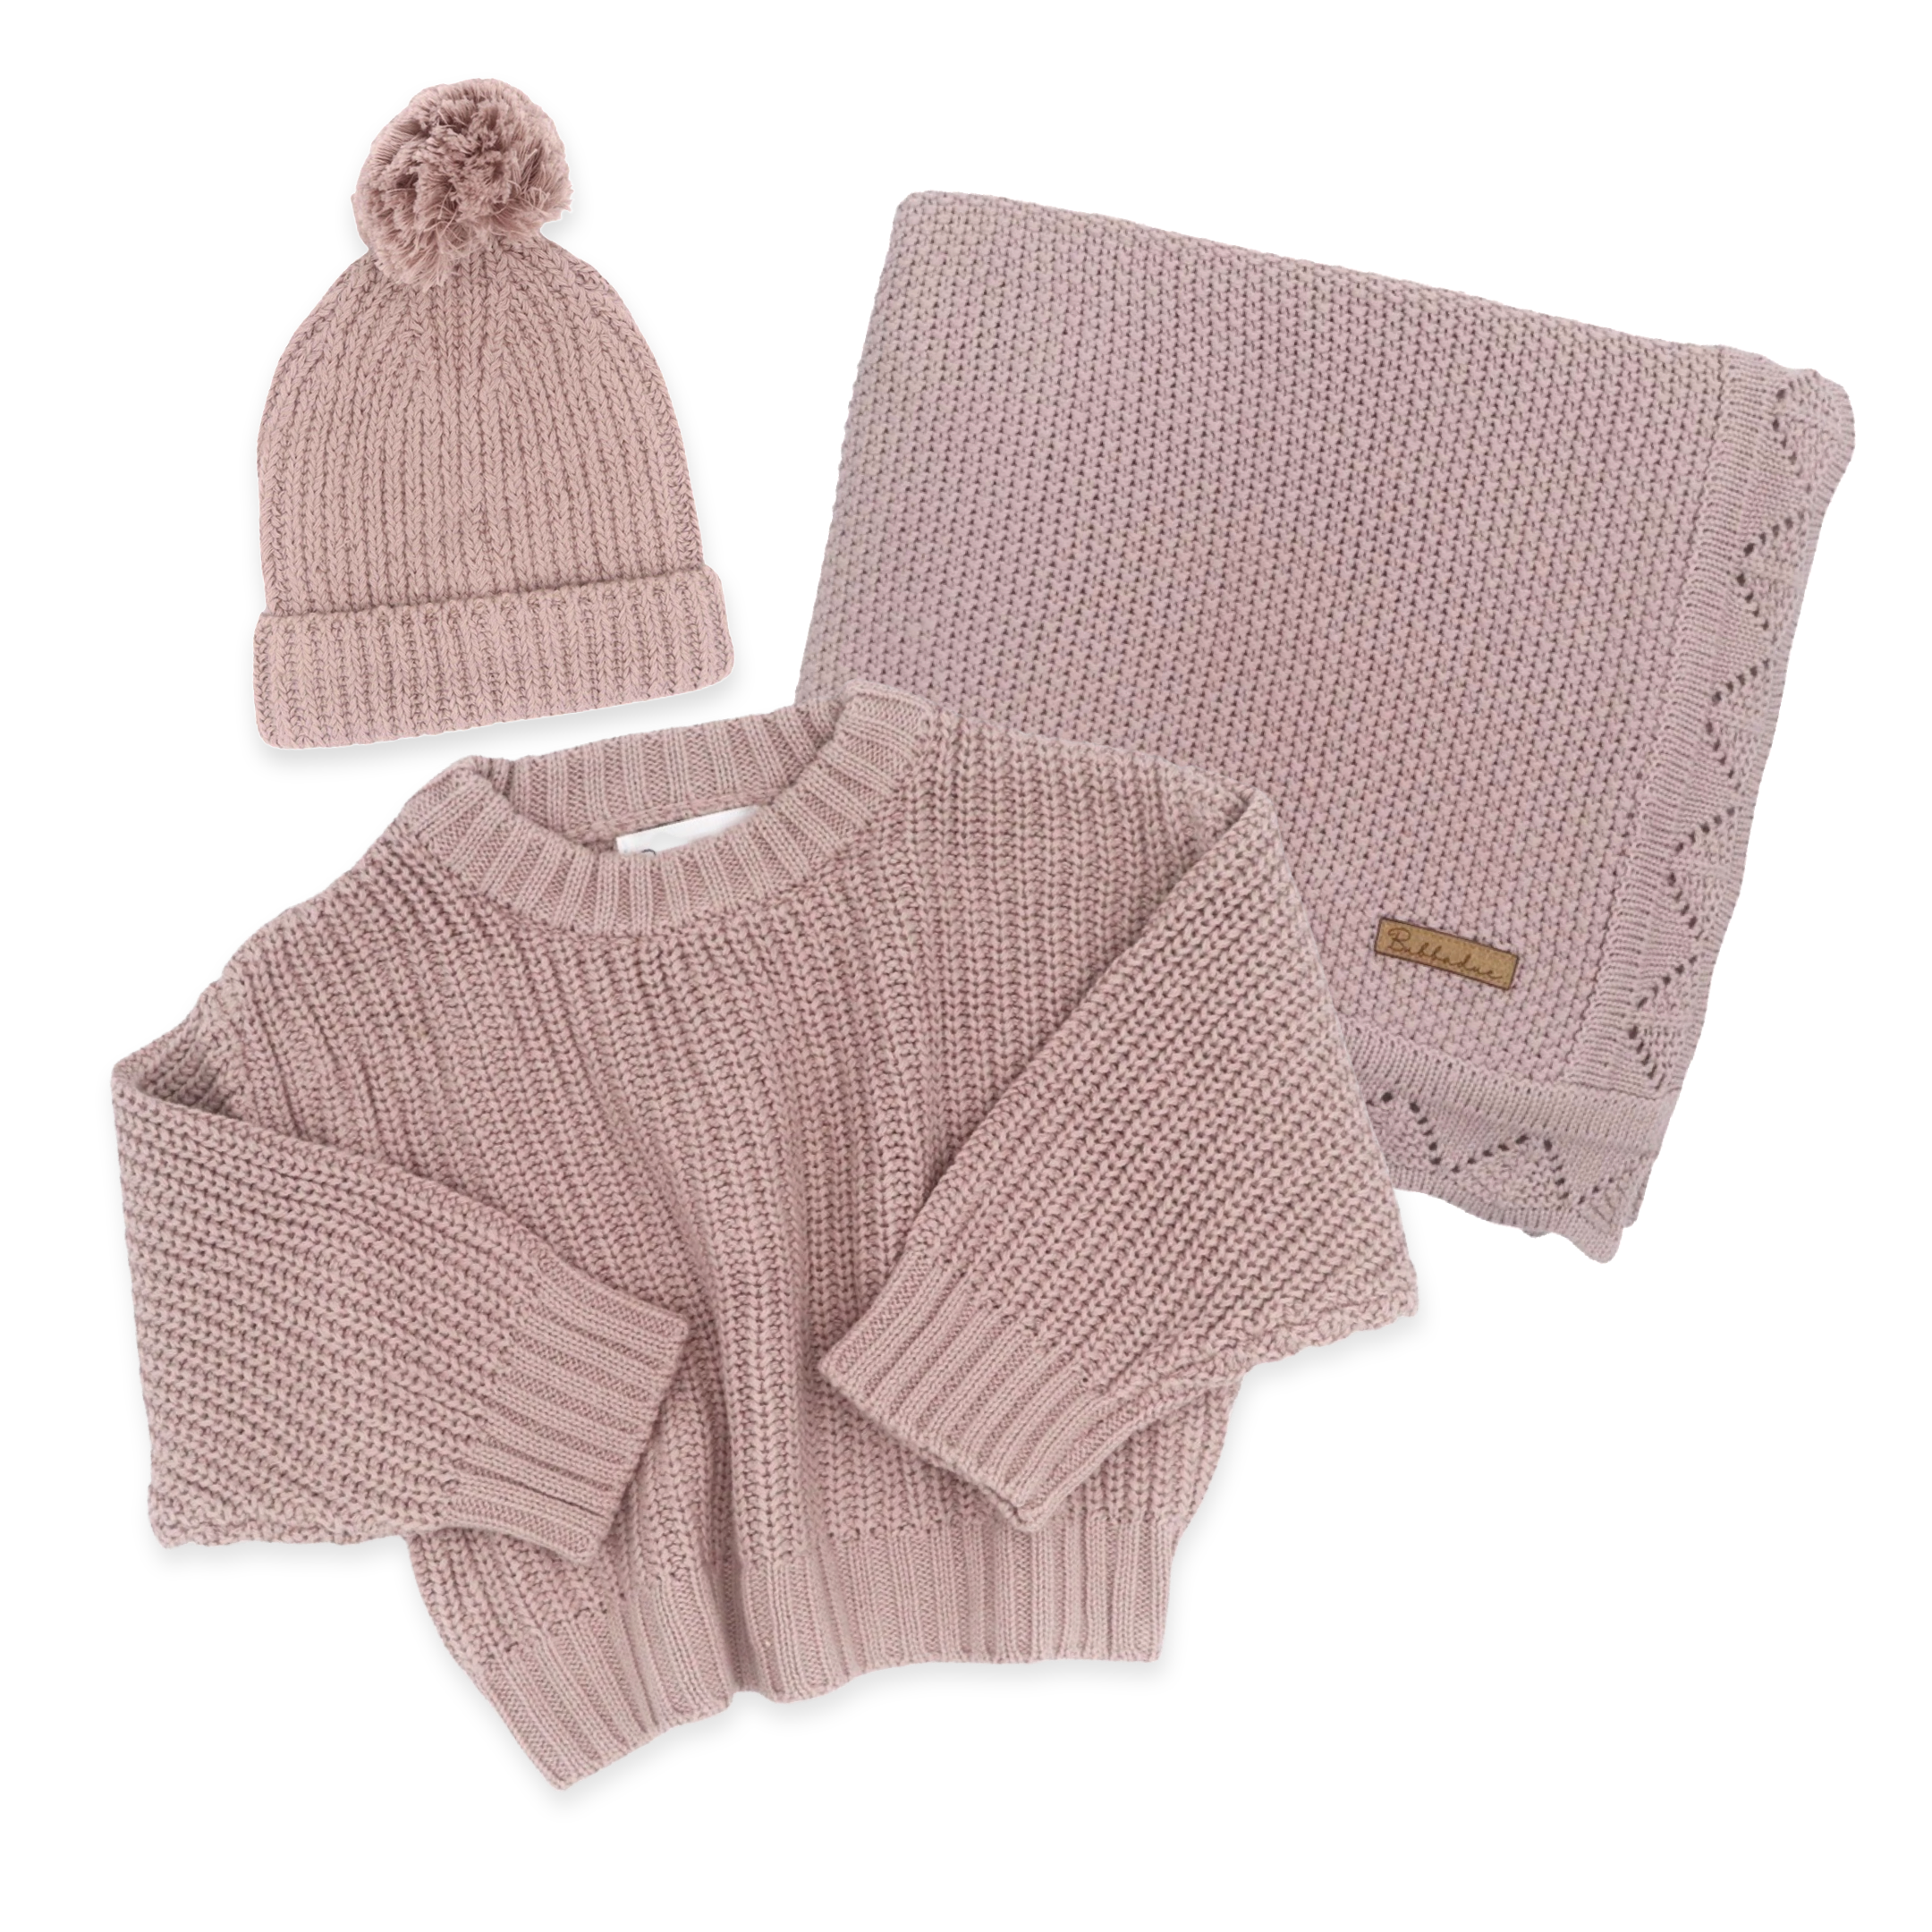 Bubbadue Knitted Baby Jersey, Beanie & Blanket Set - Dusty Lilac - Bubbadue